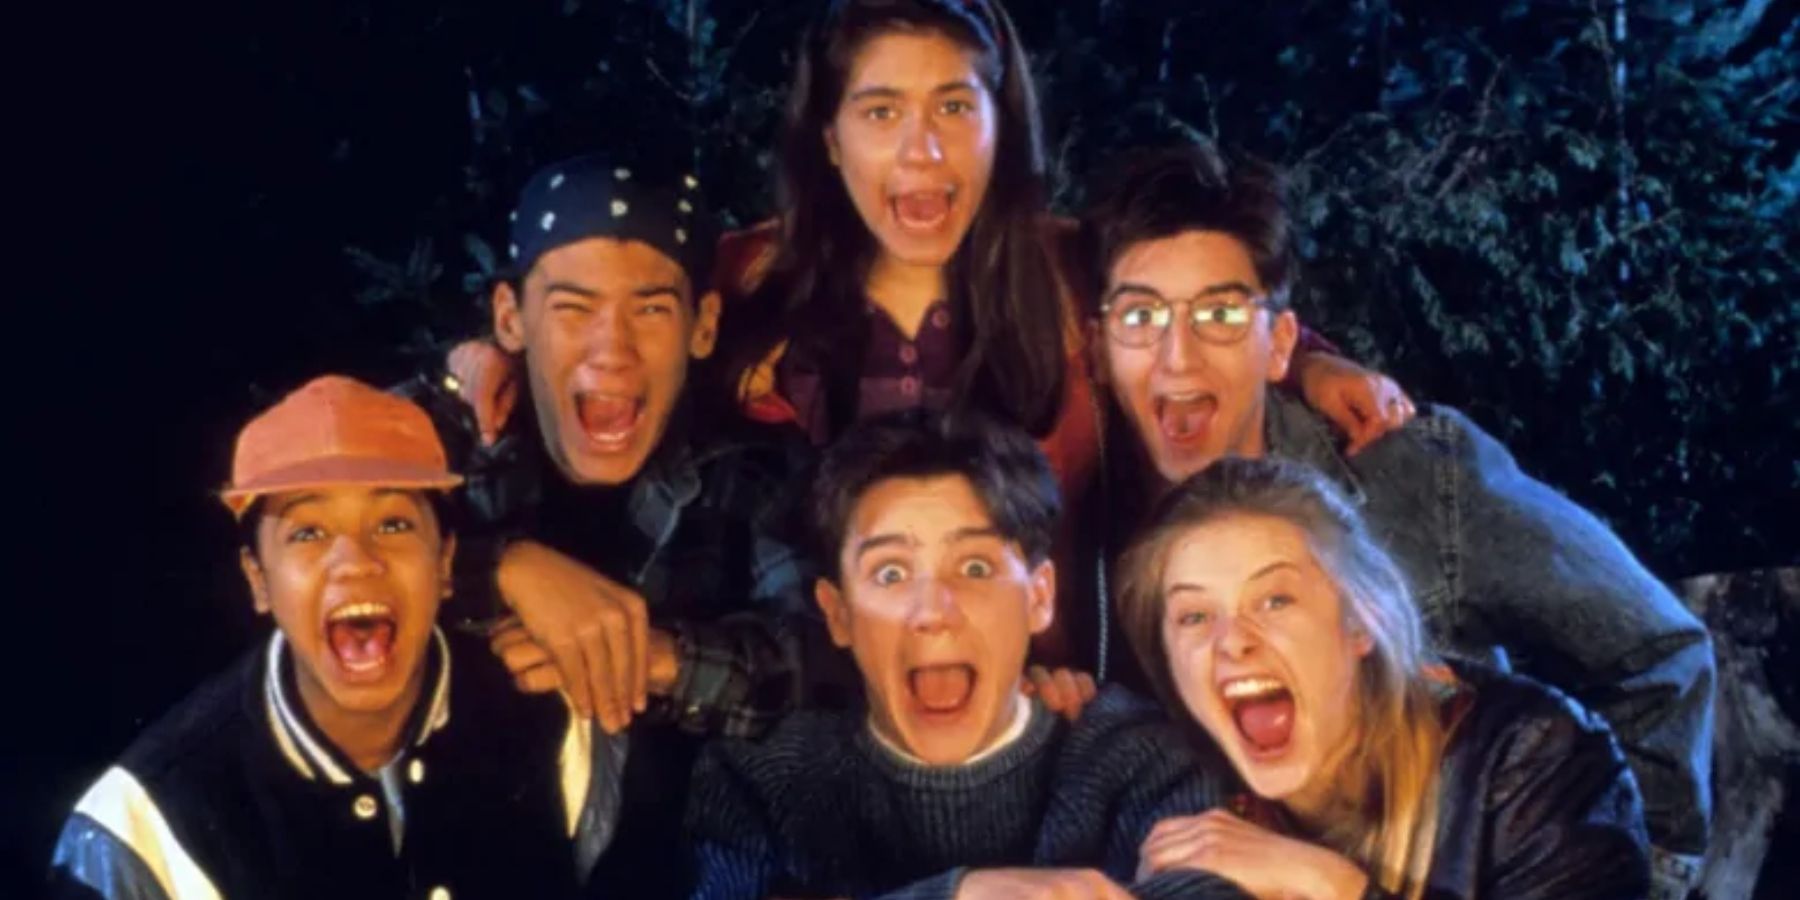 The cast of Are You Afraid Of The Dark? screaming